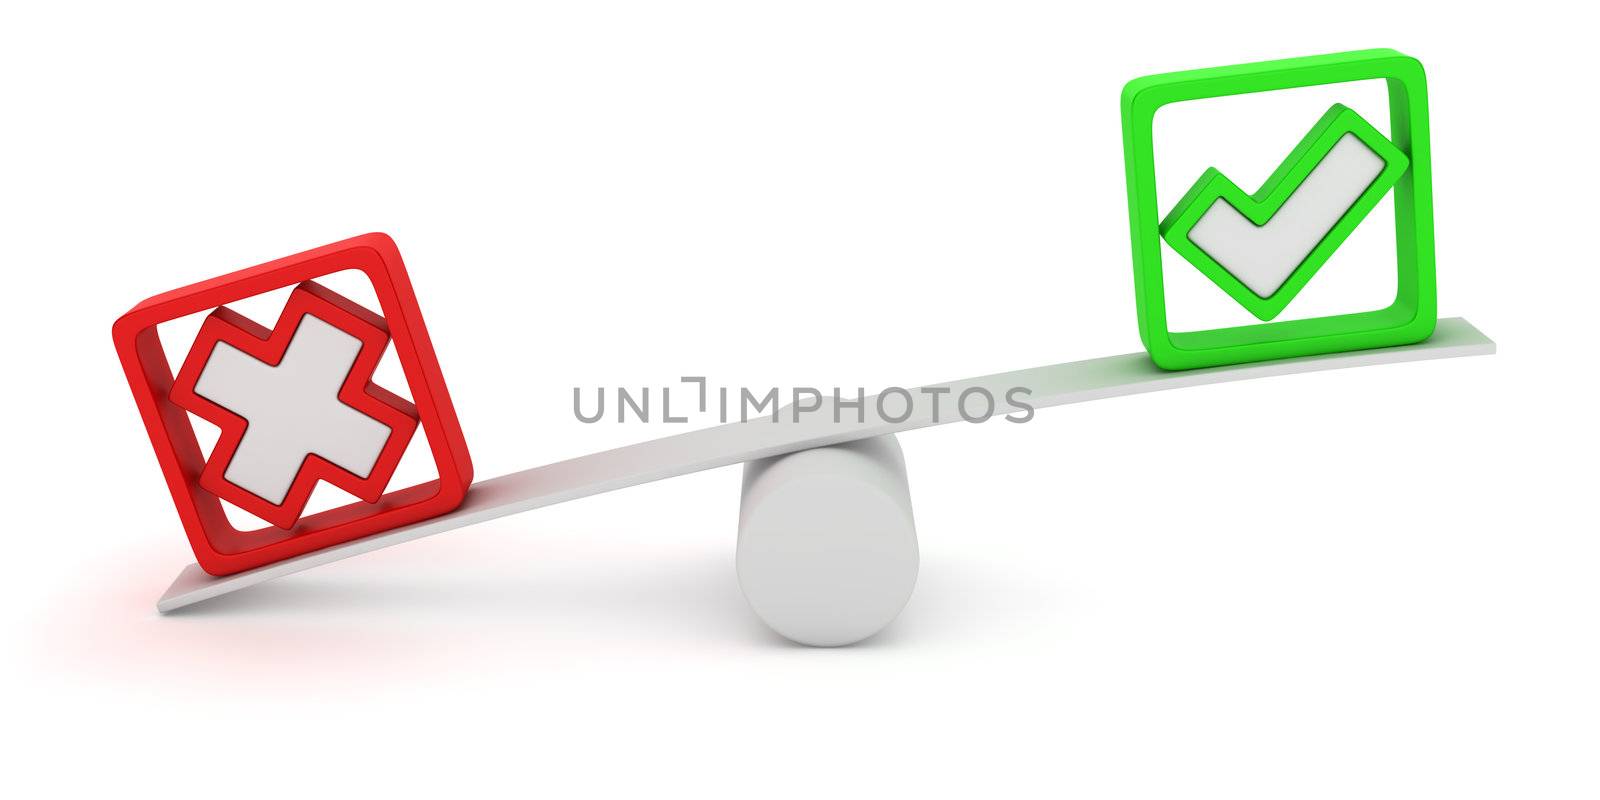 Green tick and red cross balancing on the seesaw